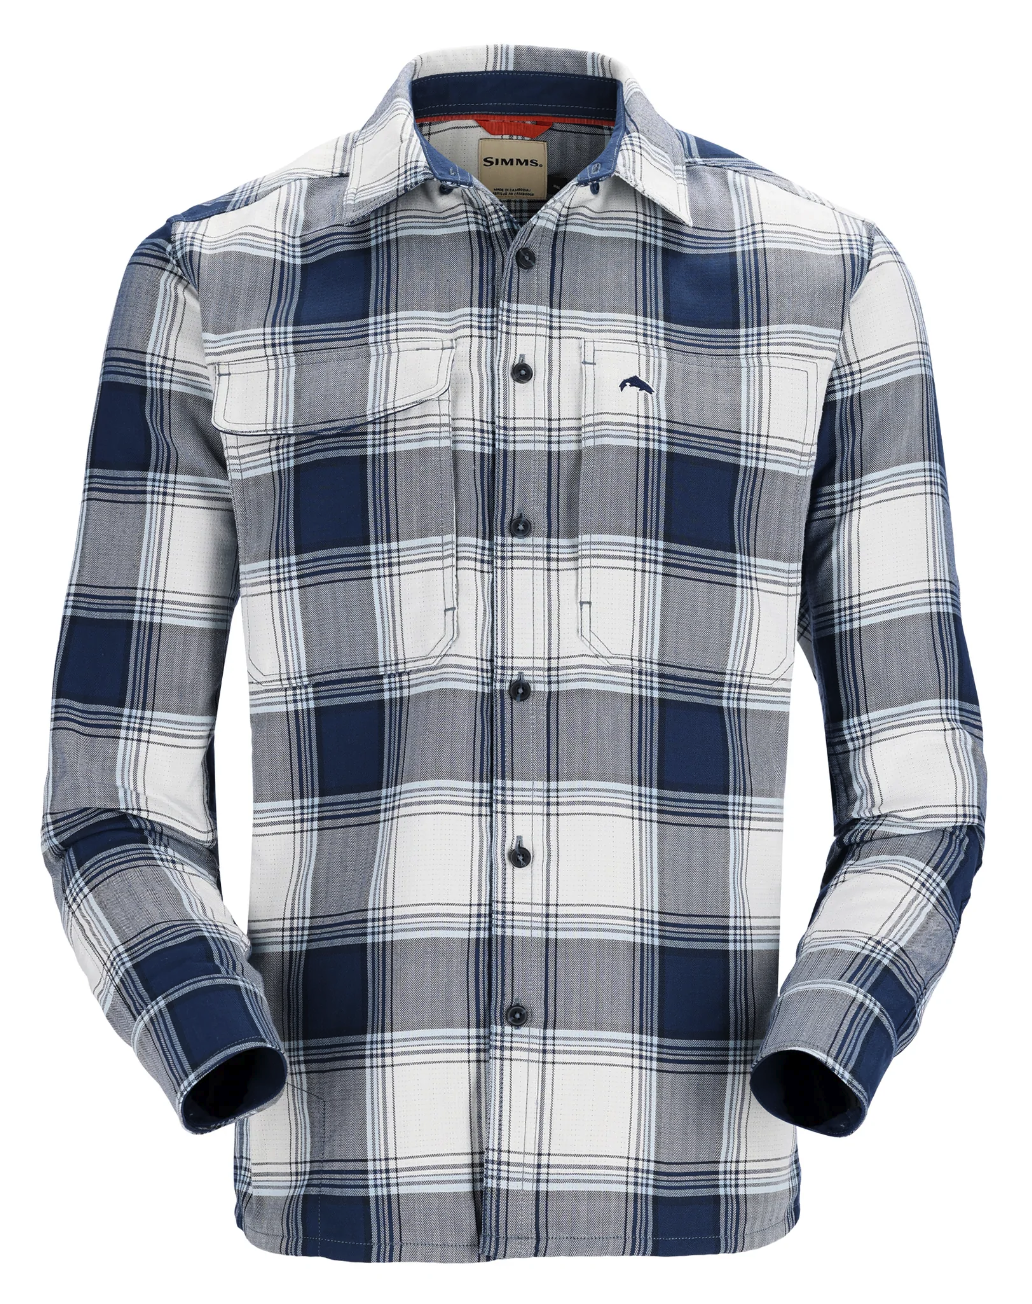 Simms Guide Flannel Shirt for sale online at The Fly Fishers fly shop.